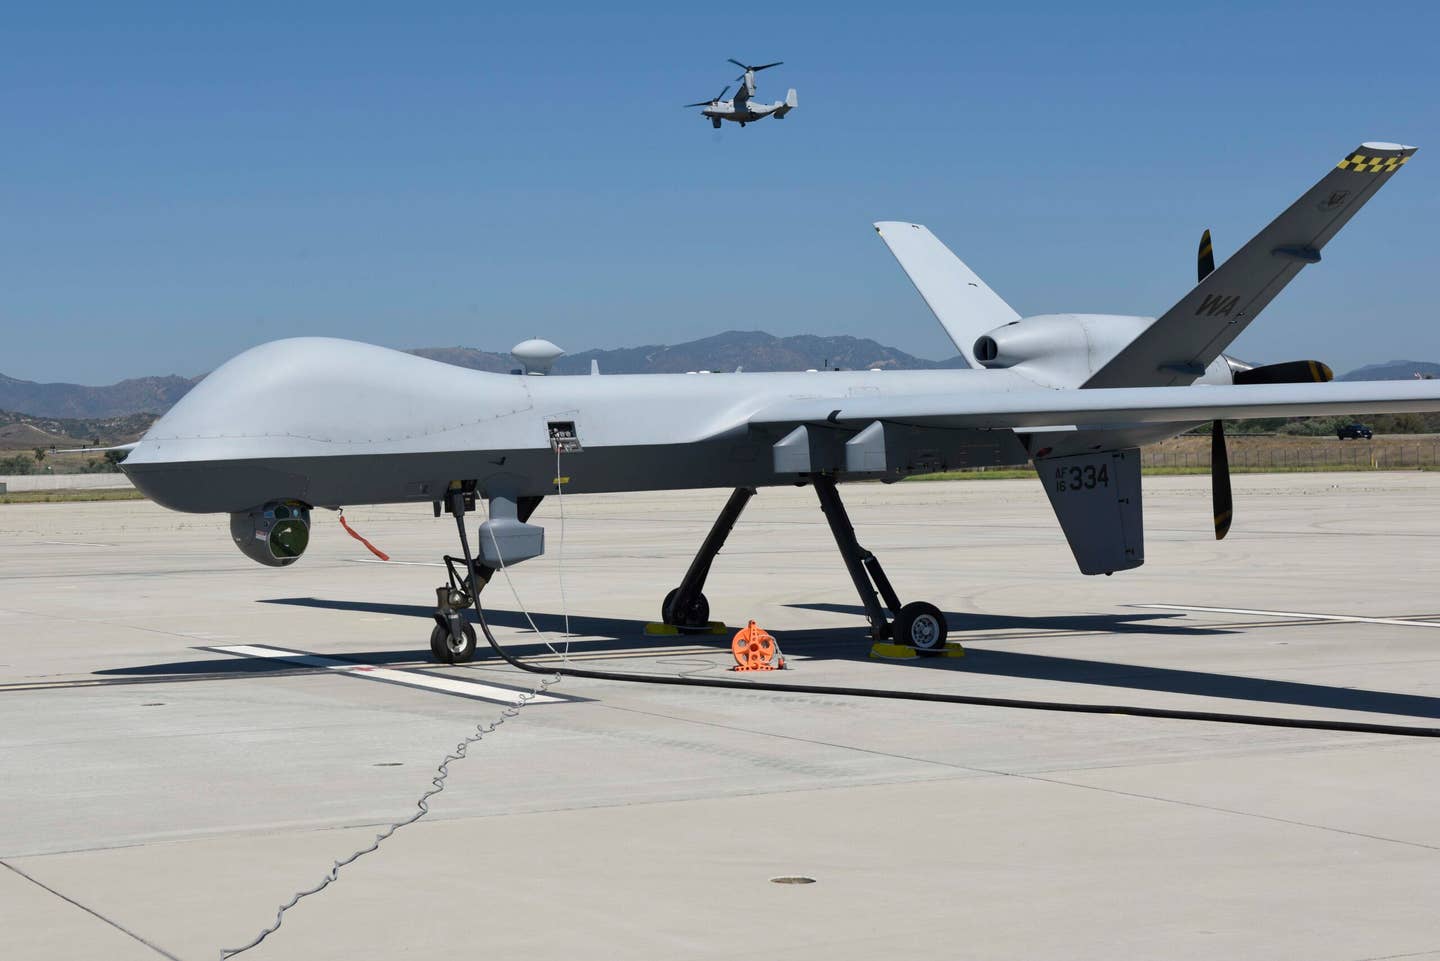 An MQ-9 Reaper remotely piloted aircraft prepares to take off from Marine Corps Base Camp Pendleton, Calif., Aug. 23, 2023. The MQ-9 Reaper remotely piloted aircraft was prepping to take off from Marine Corps Base Camp Pendleton, Calif., for the first time during the Agile Hunter exercise. (U.S. Air Force photo by Airman 1st Class Victoria Nuzzi)